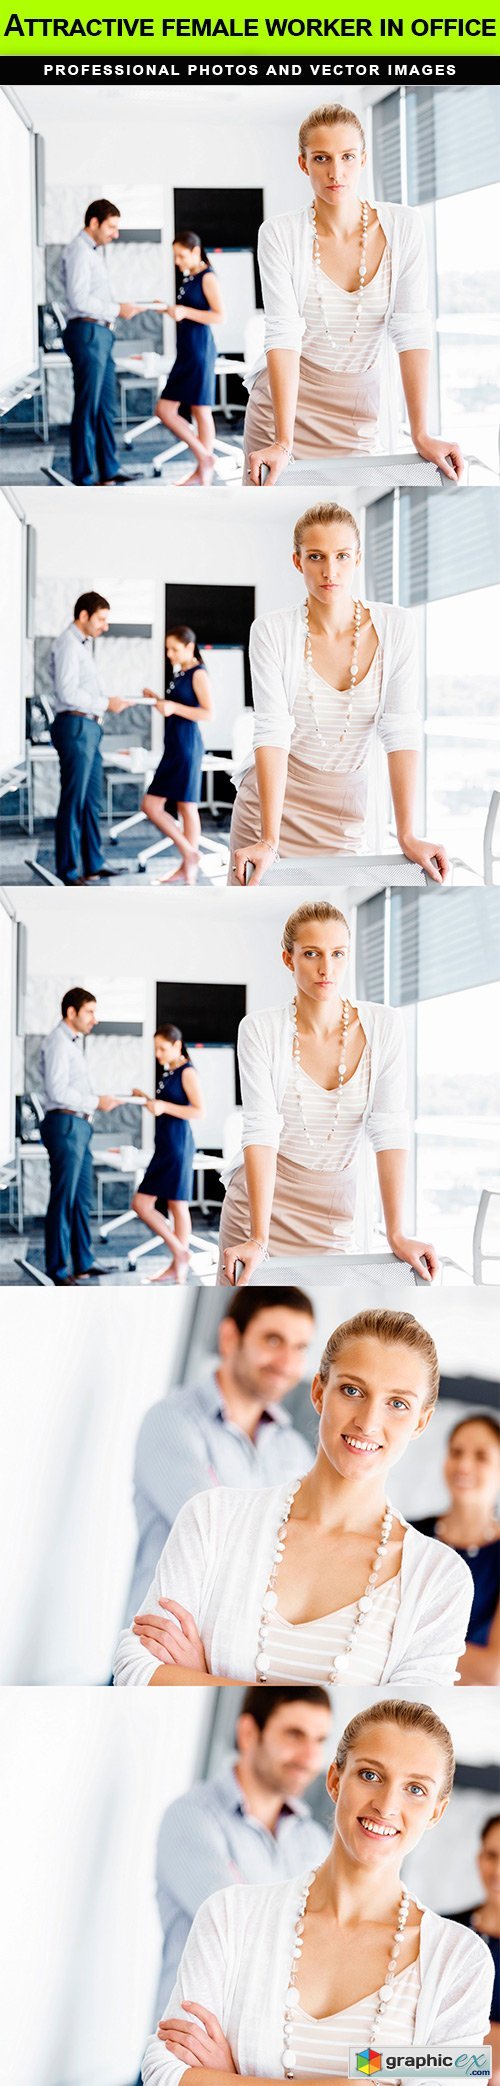 Attractive female worker in office